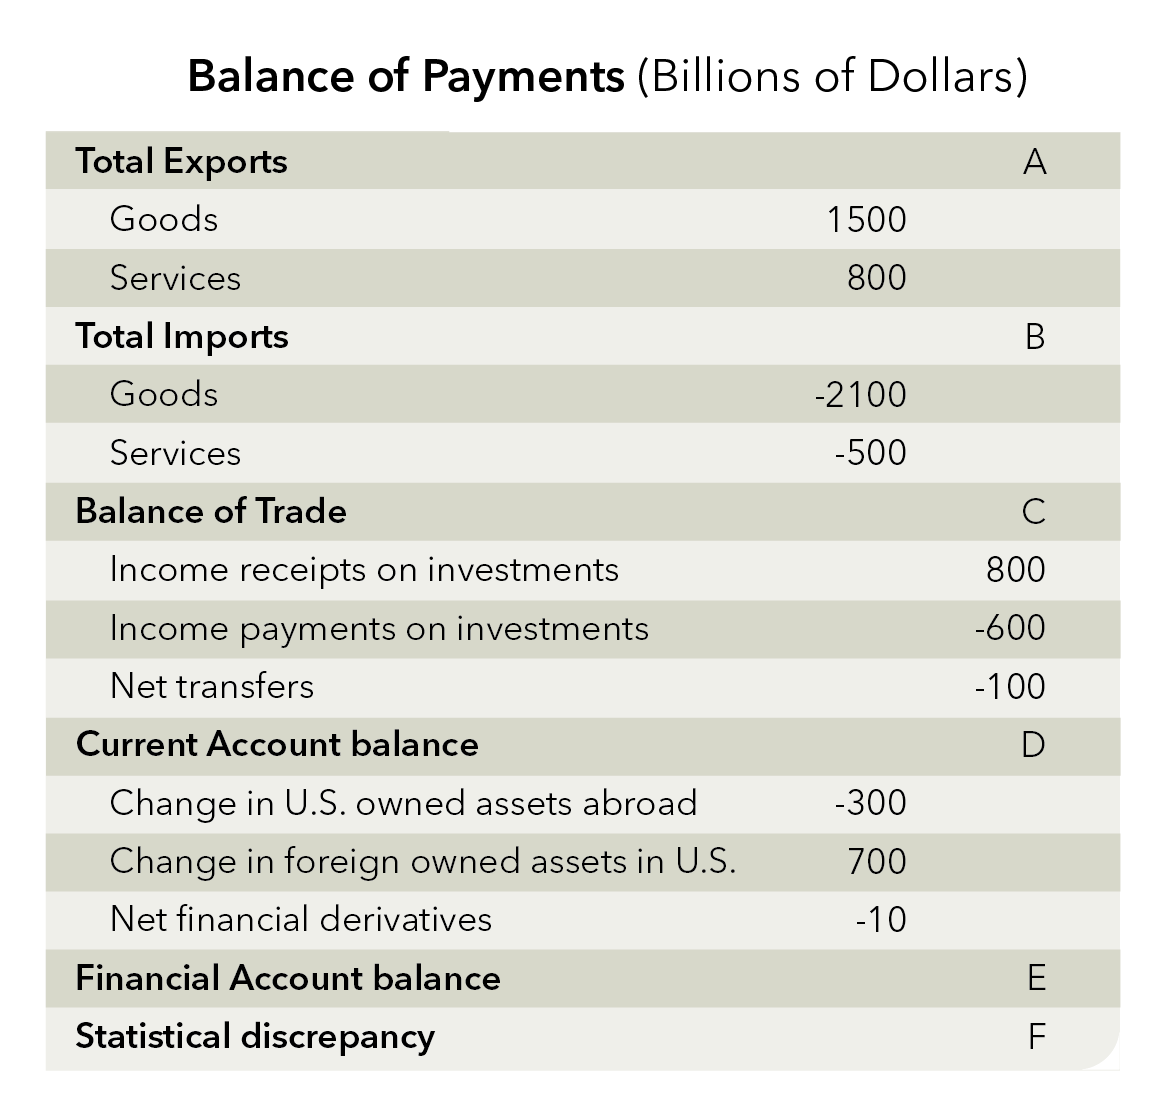 Balance of Payments (Billions of Dollars)
Total Exports
A
Goods
1500
Services
800
Total Imports
В
Goods
-2100
Services
-500
Balance of Trade
C
Income receipts on investments
800
Income payments on investments
-600
Net transfers
-100
Current Account balance
Change in U.S. owned assets abroad
-300
Change in foreign owned assets in U.S.
700
Net financial derivatives
-10
Financial Account balance
E
Statistical discrepancy
F
